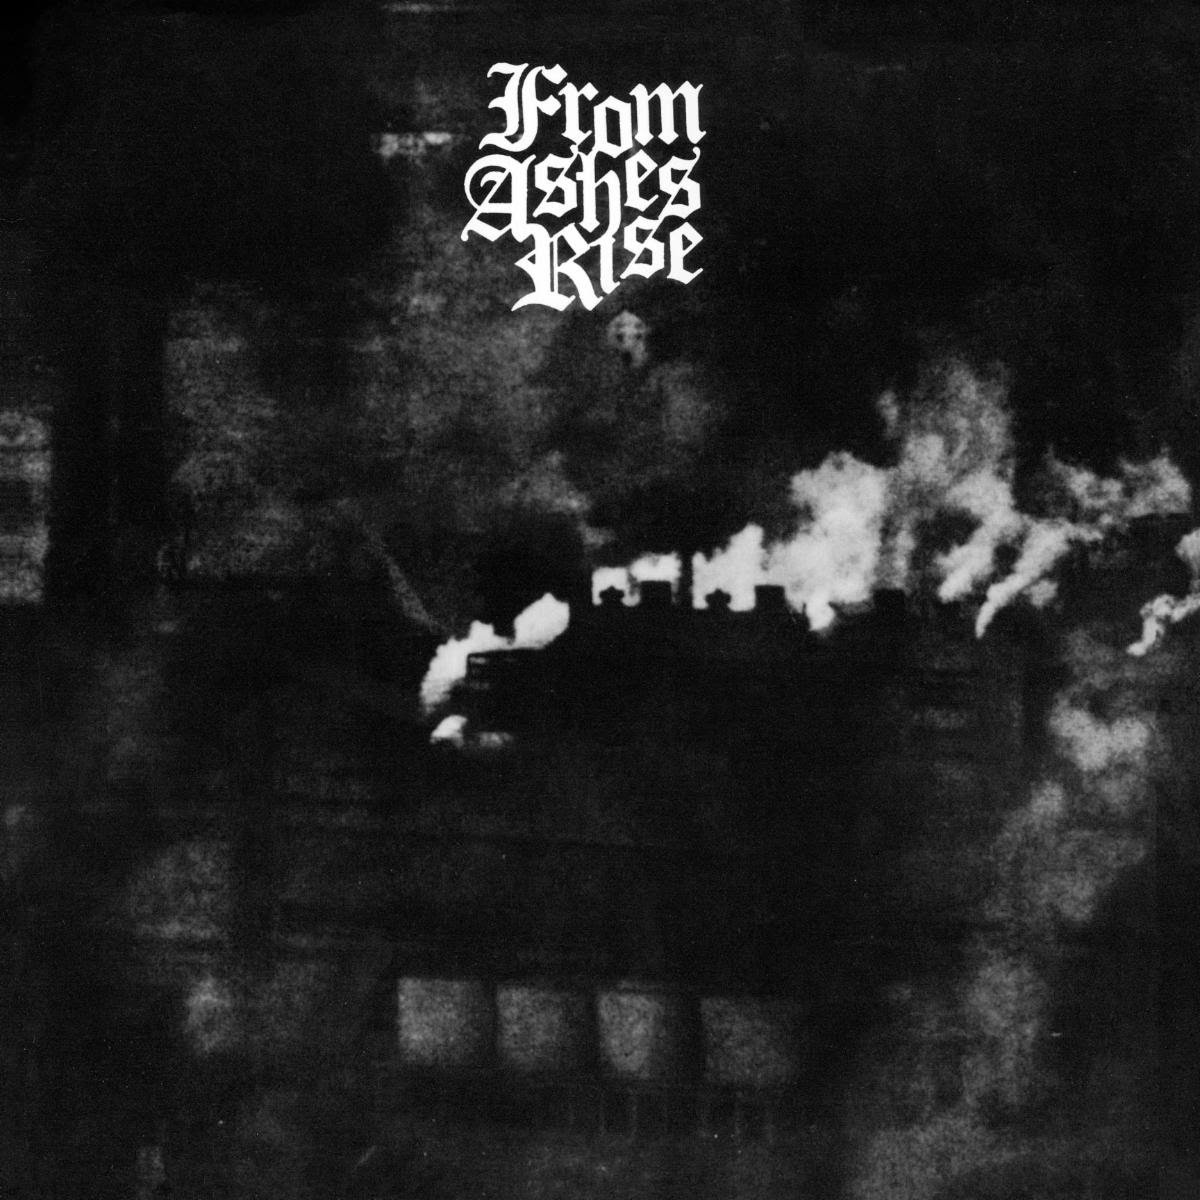 FROM ASHES RISE 2019 reissues 1